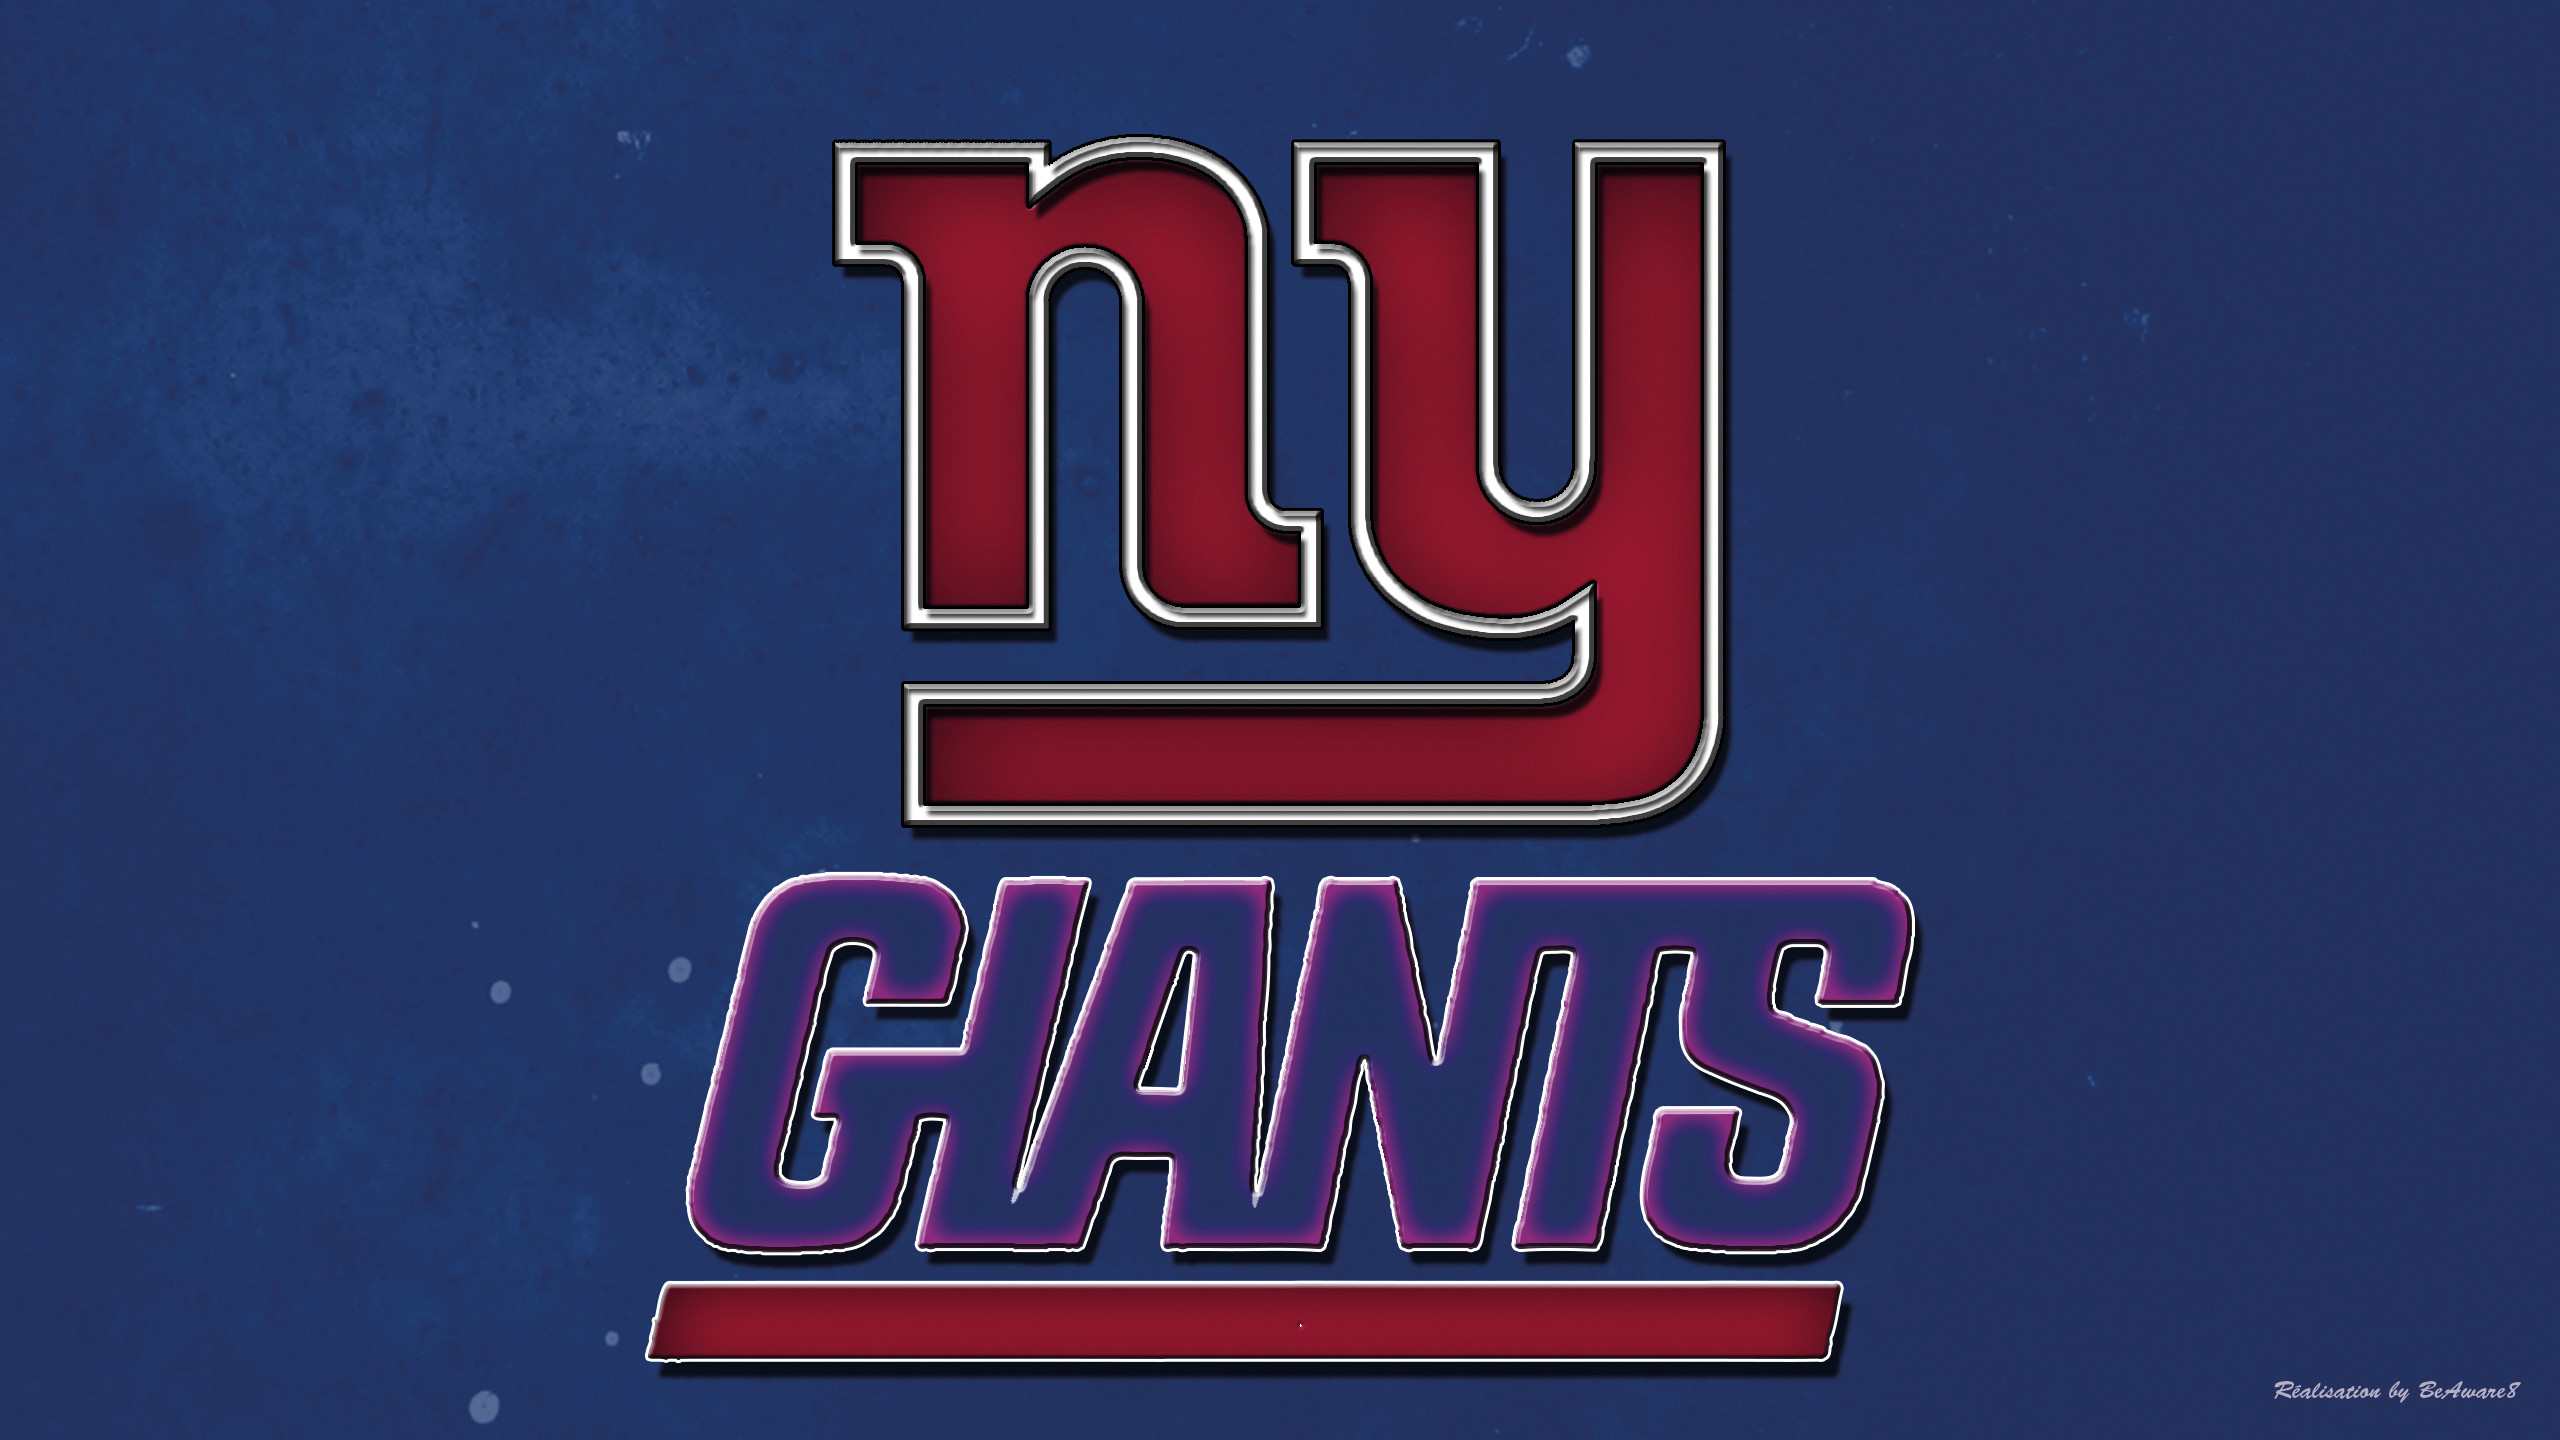 2560x1440 New York Giants by BeAware8 New York Giants by BeAware8